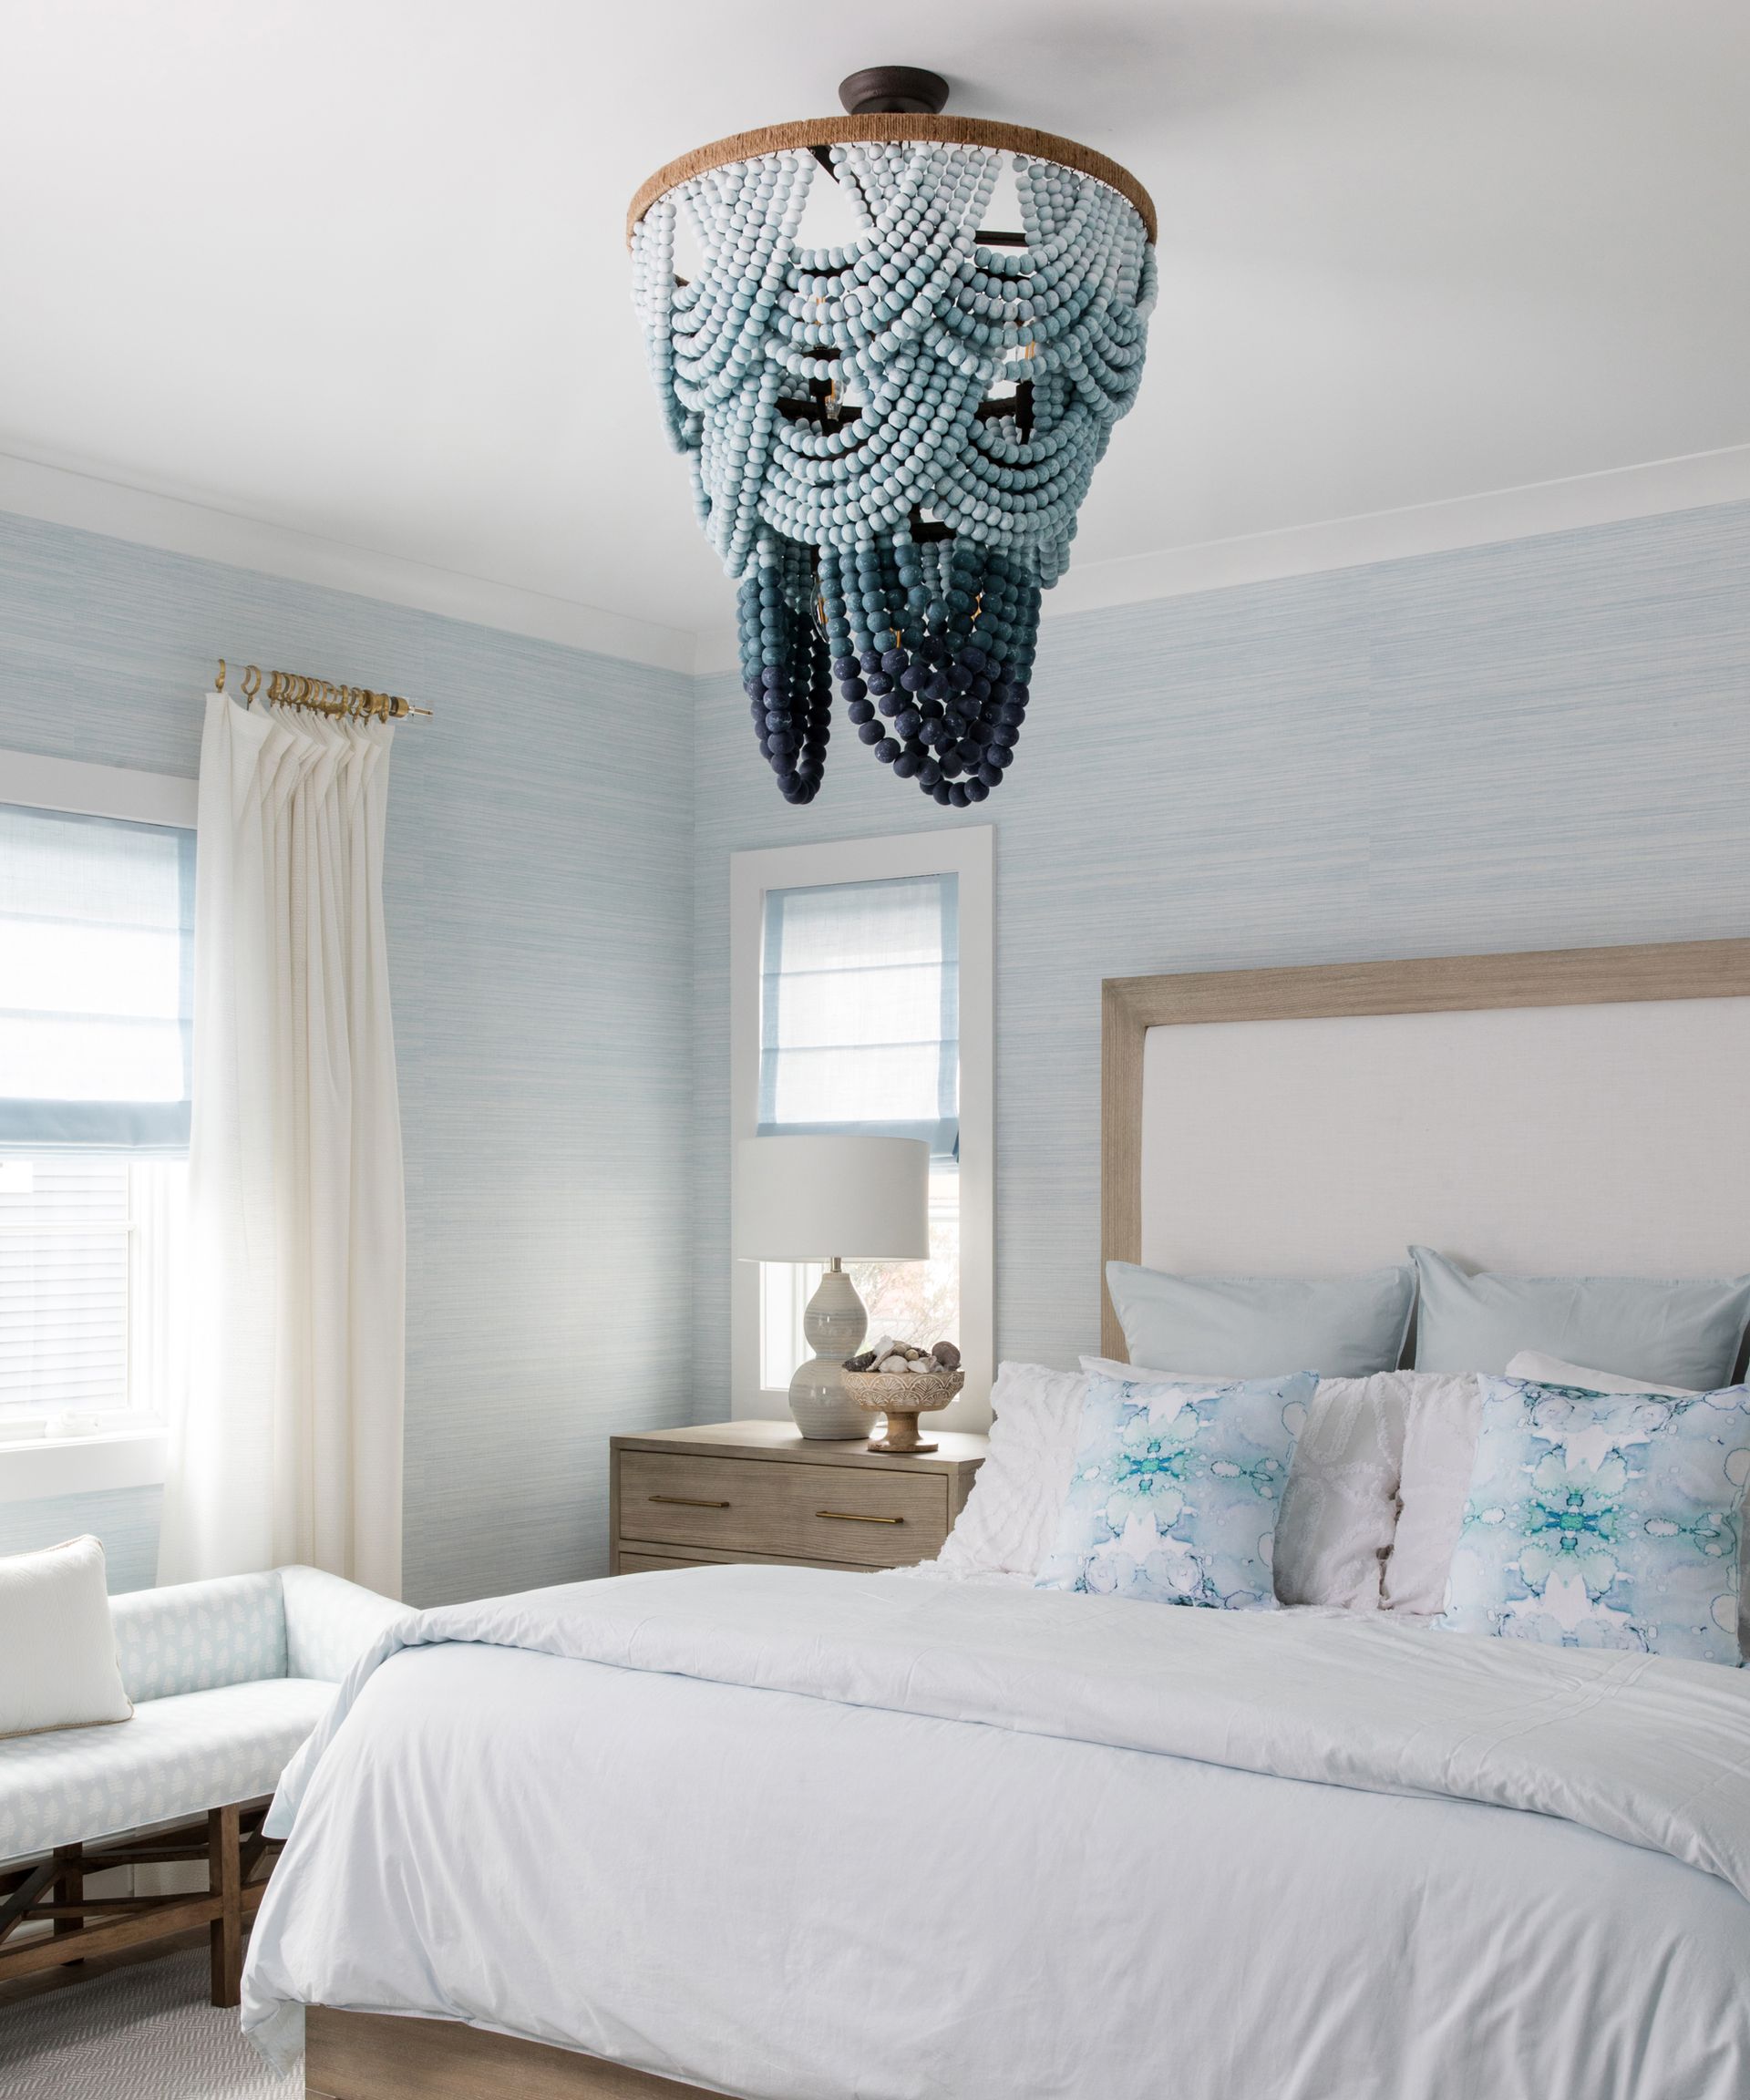 32 bedroom lighting ideas to illuminate your space like a dream | Real ...